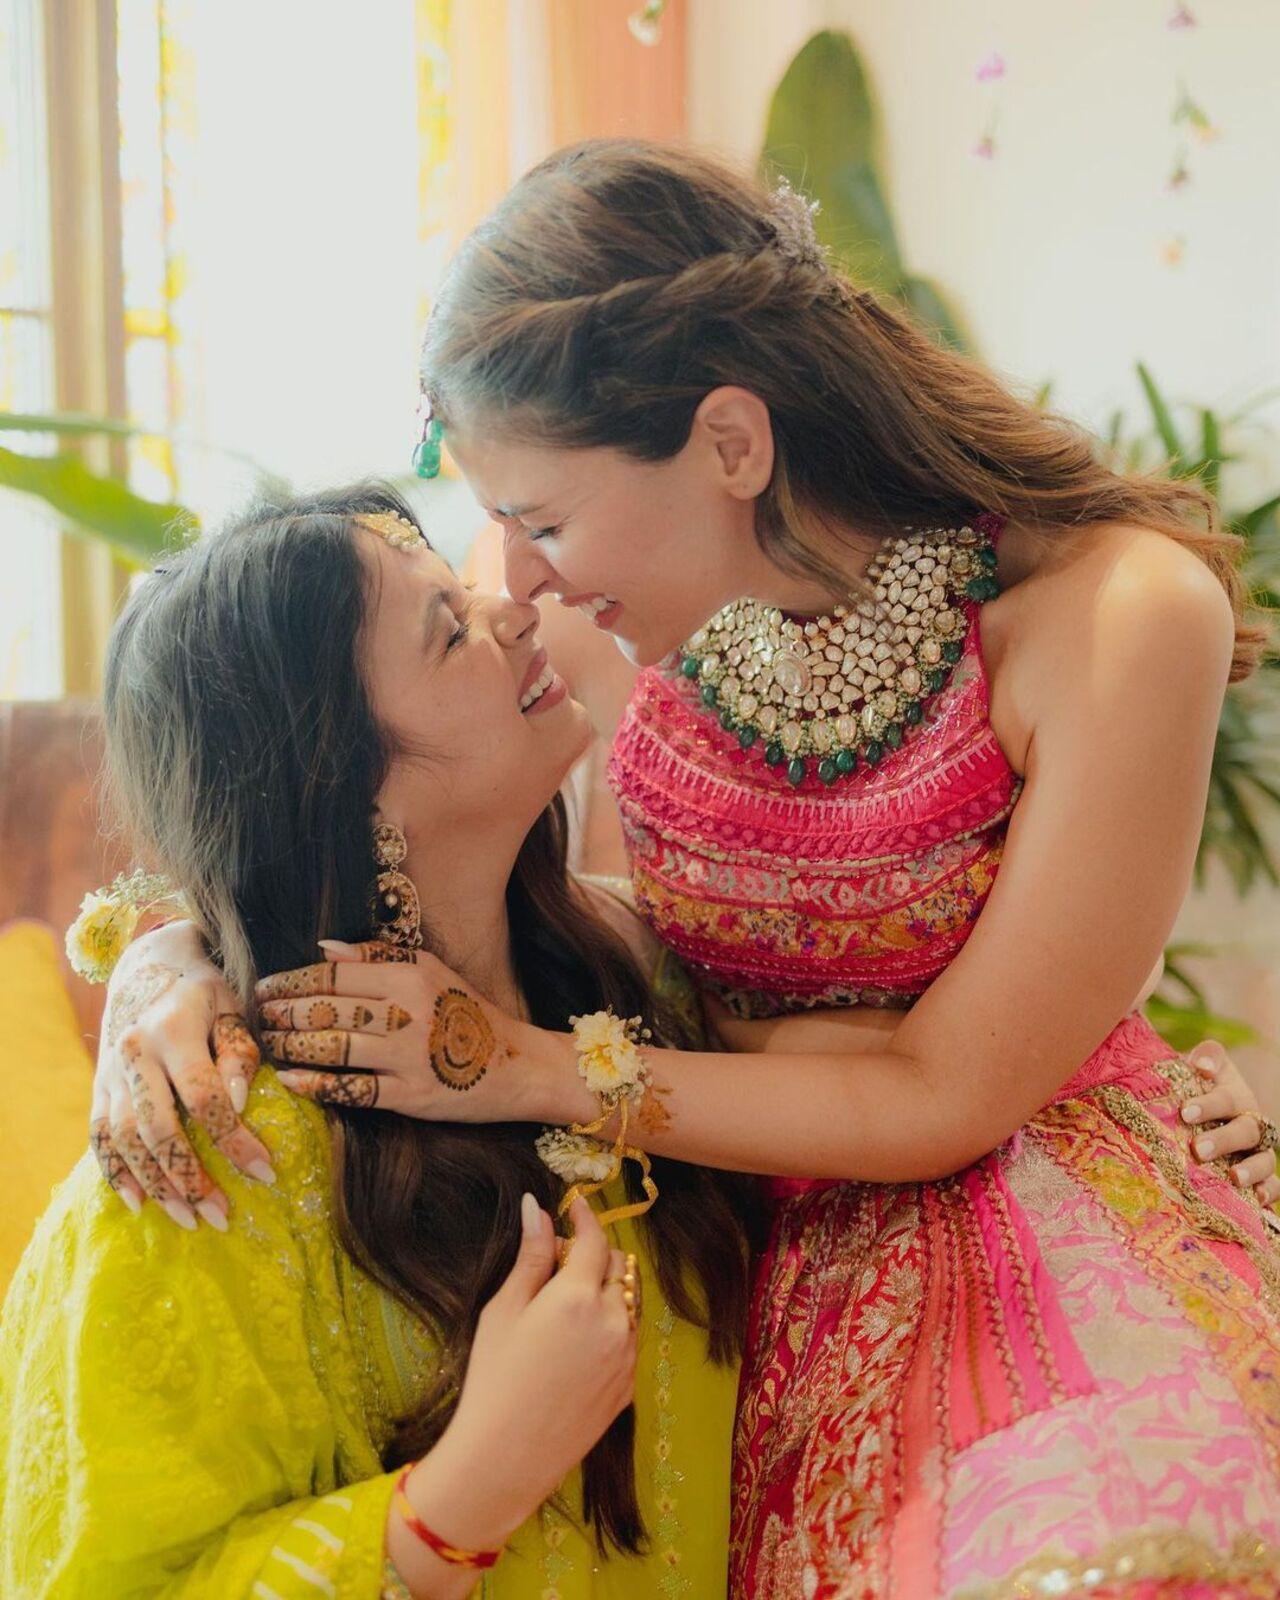 This picture from Alia's mehendi ceremony is adorable and heartwarming in equal measures